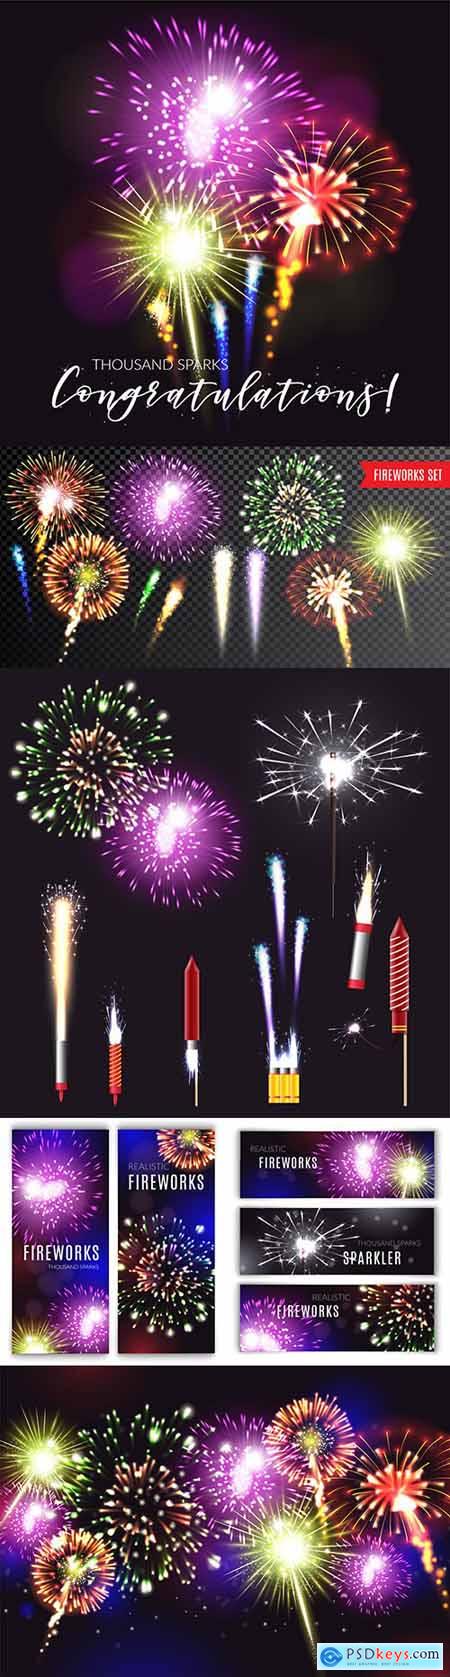 Fireworks realistic poster holiday vector illustration